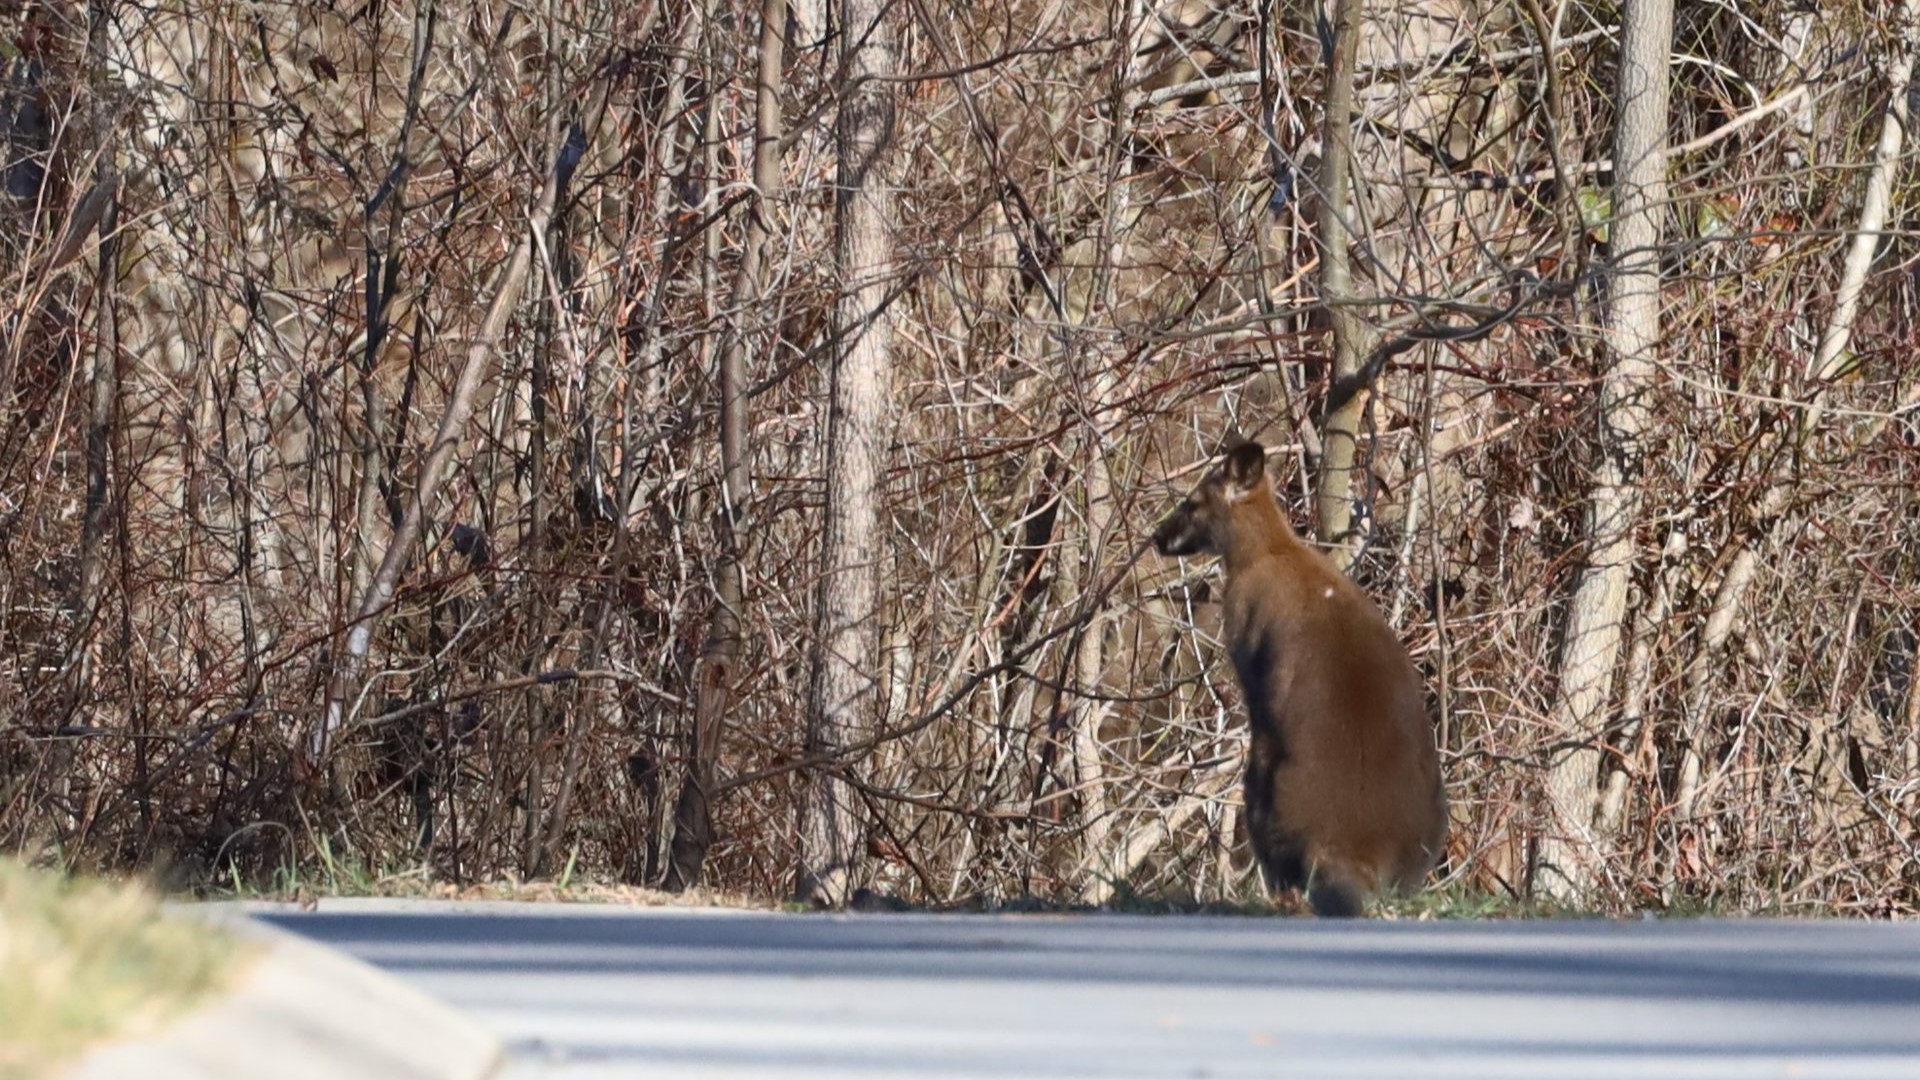 Pet wallaby was last seen running across the Lincoln Memorial University campus Wednesday morning.